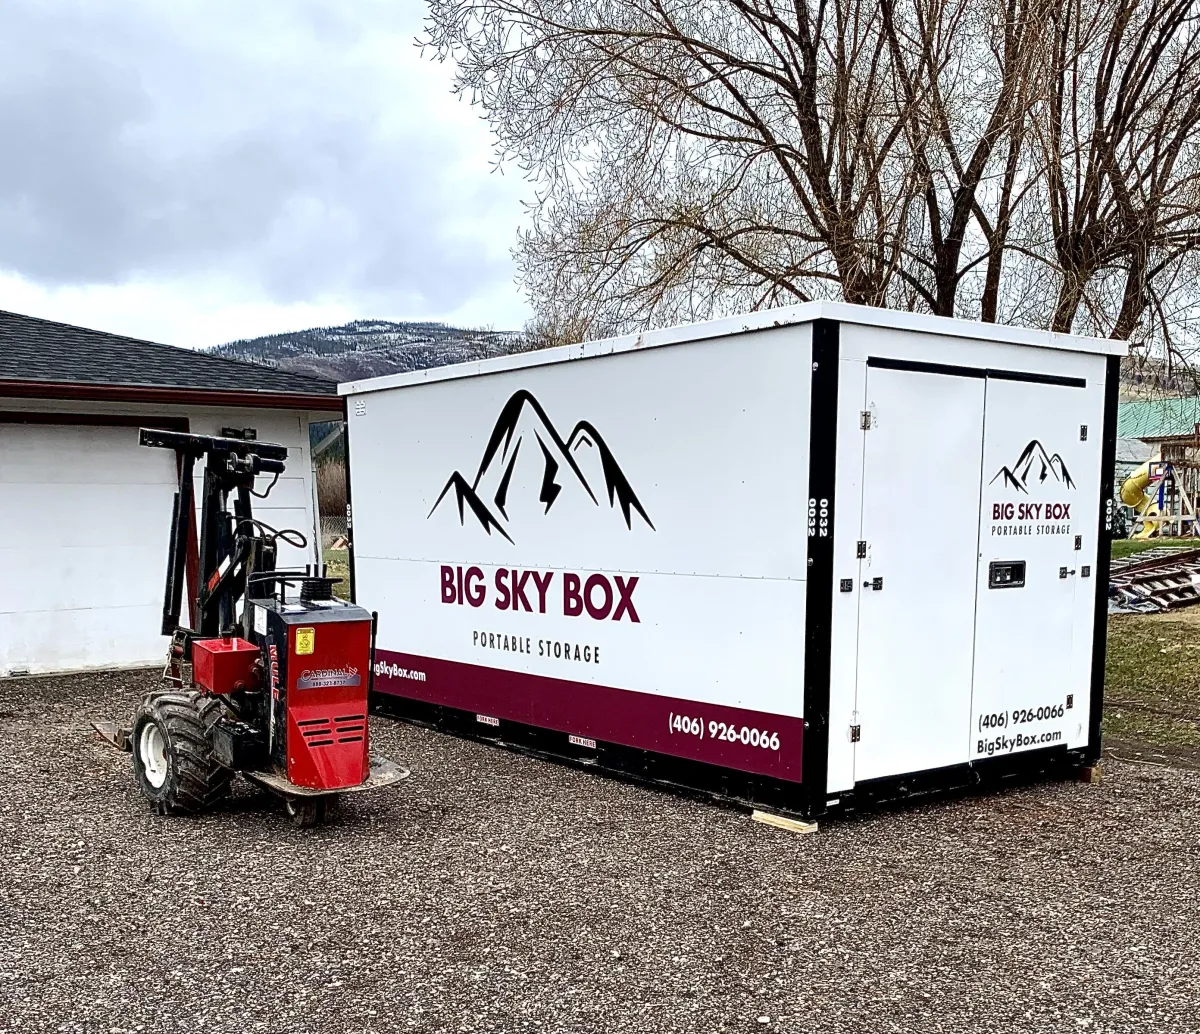 Image of a Big Sky Box Portable Storage in Missoula container in a driveway next to the mule delivery vehicle